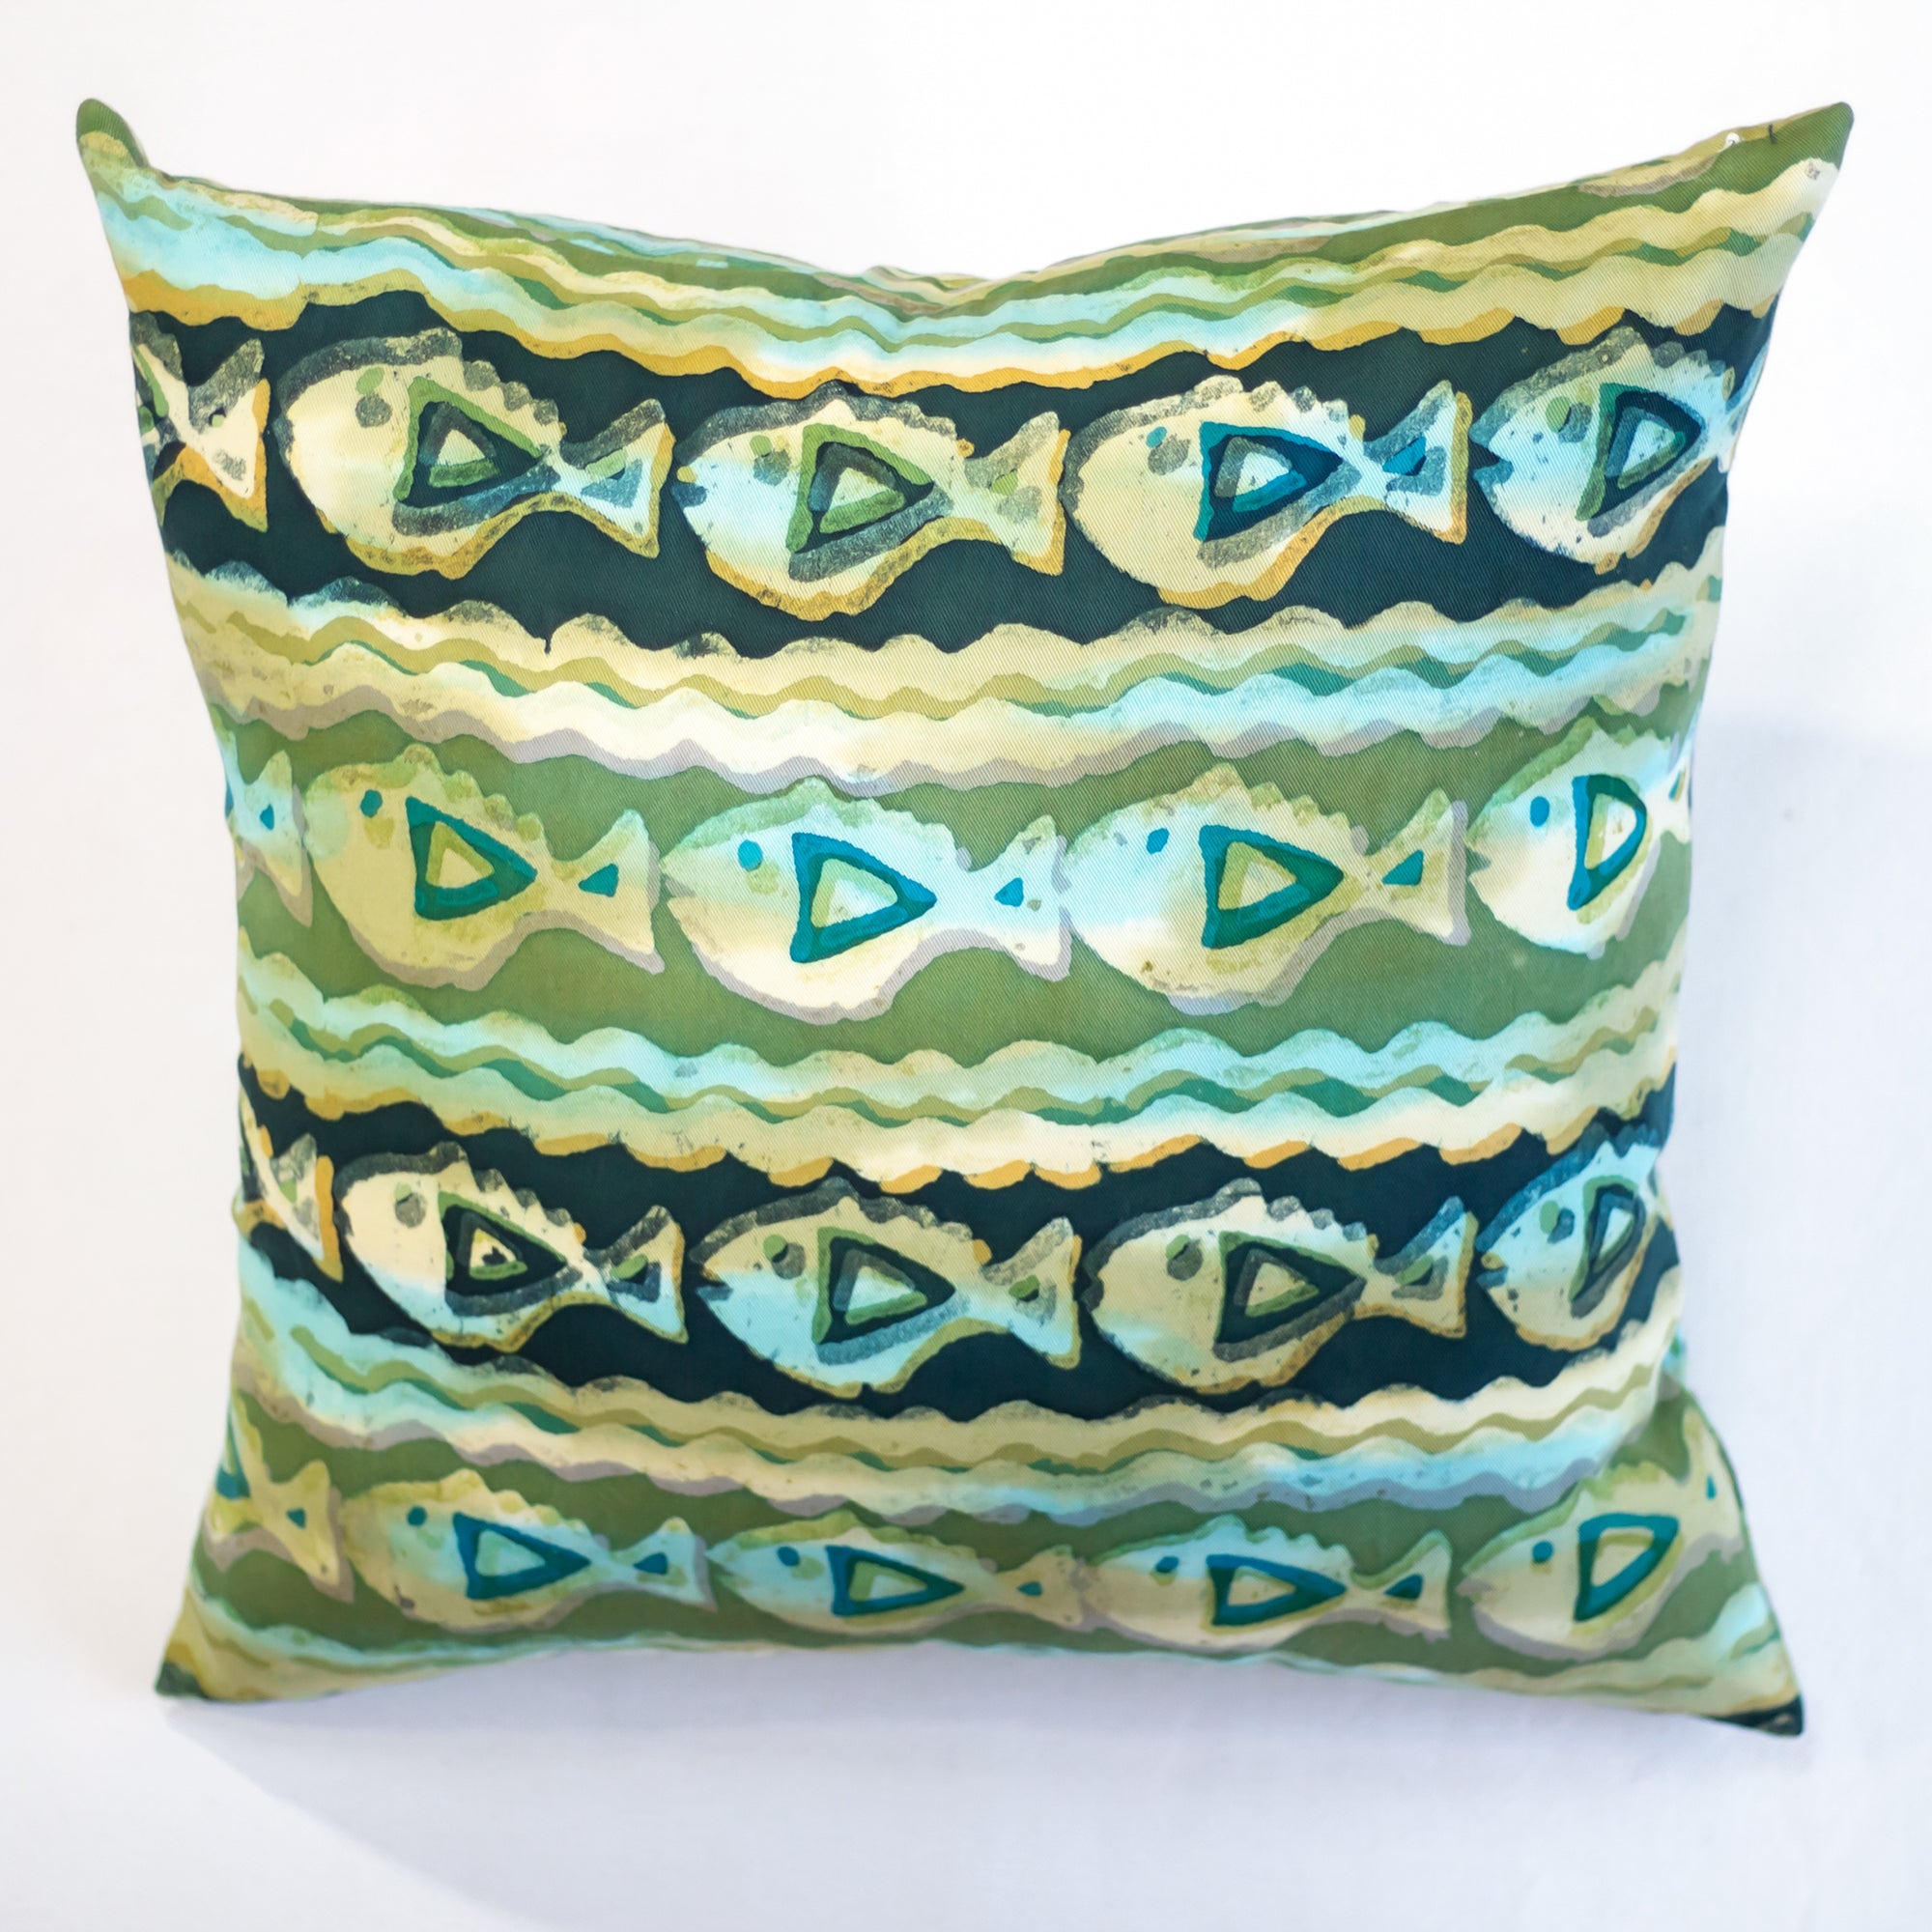 Hand Painted Accent Pillow Cover - Piranhas Parade